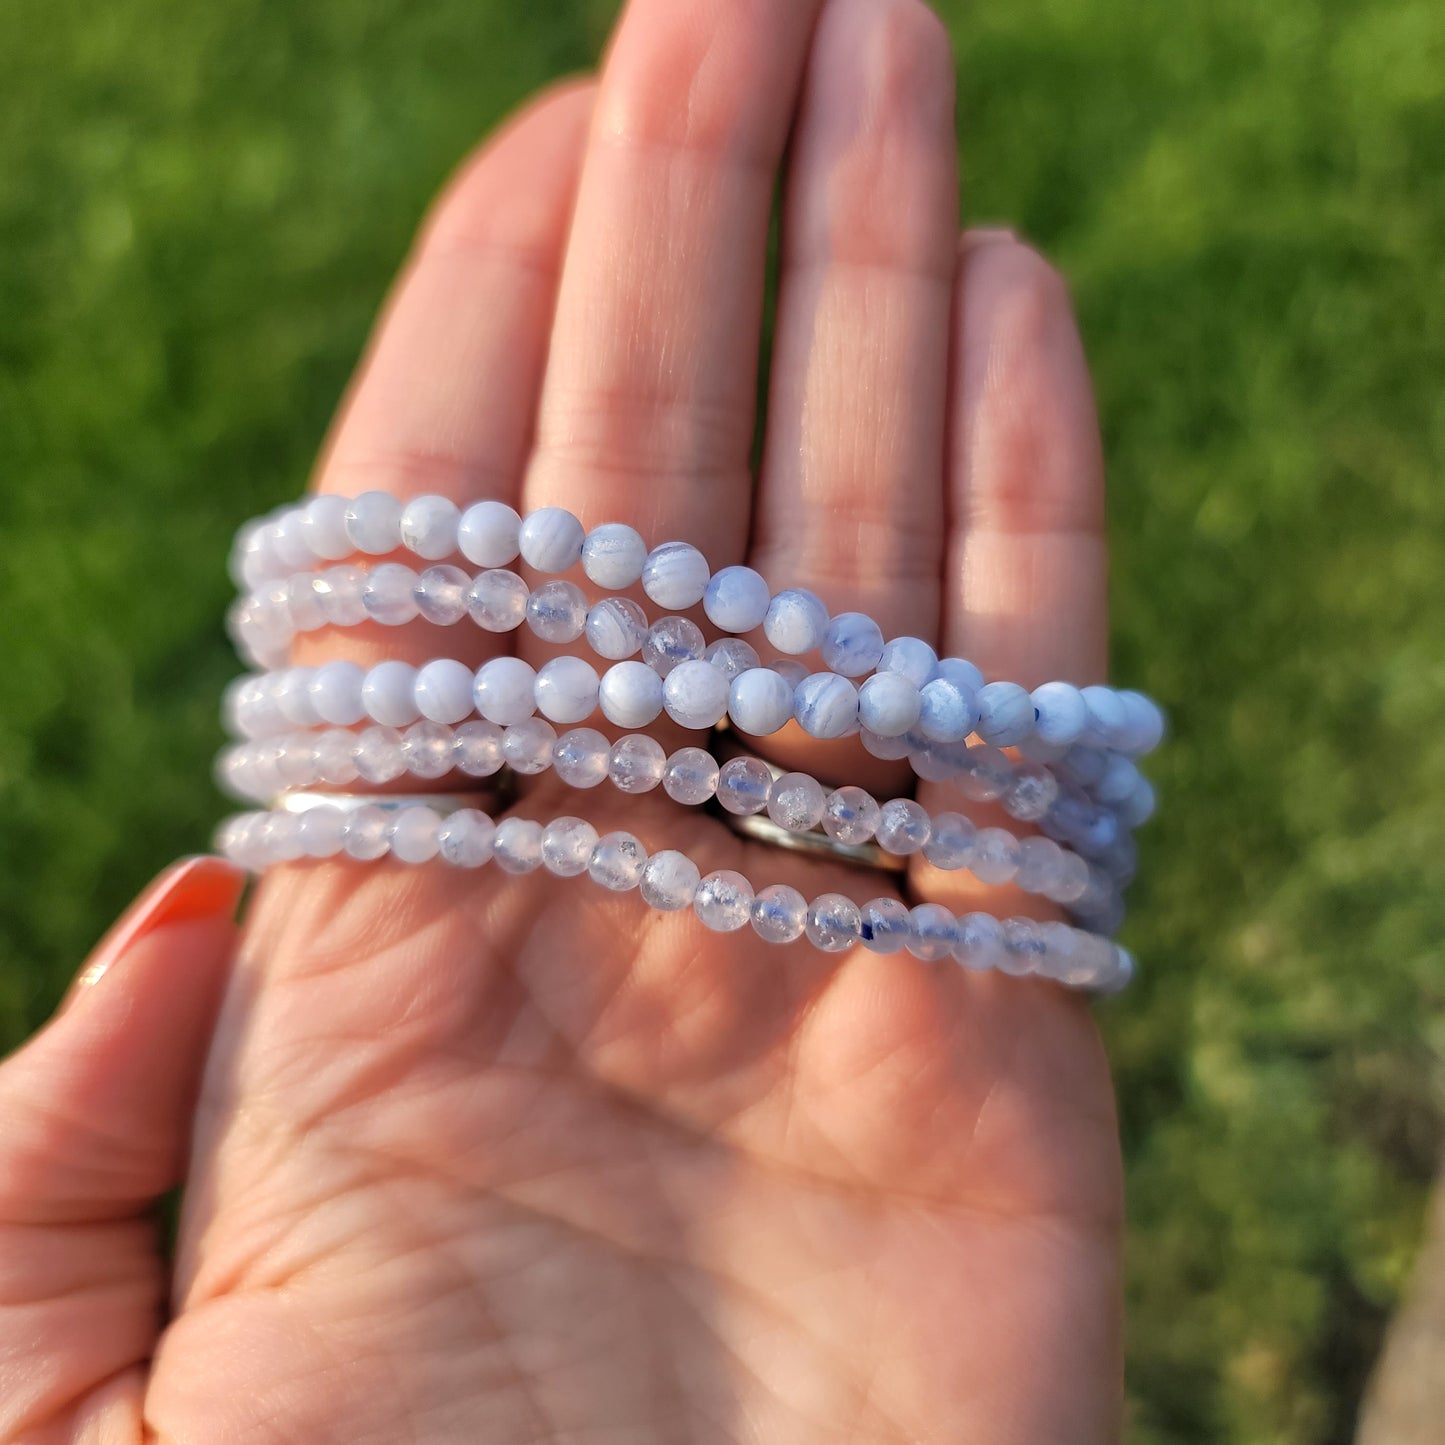 Blue Lace Agate Bracelet - 4mm Beads - Soothing, Nurturing, Communication